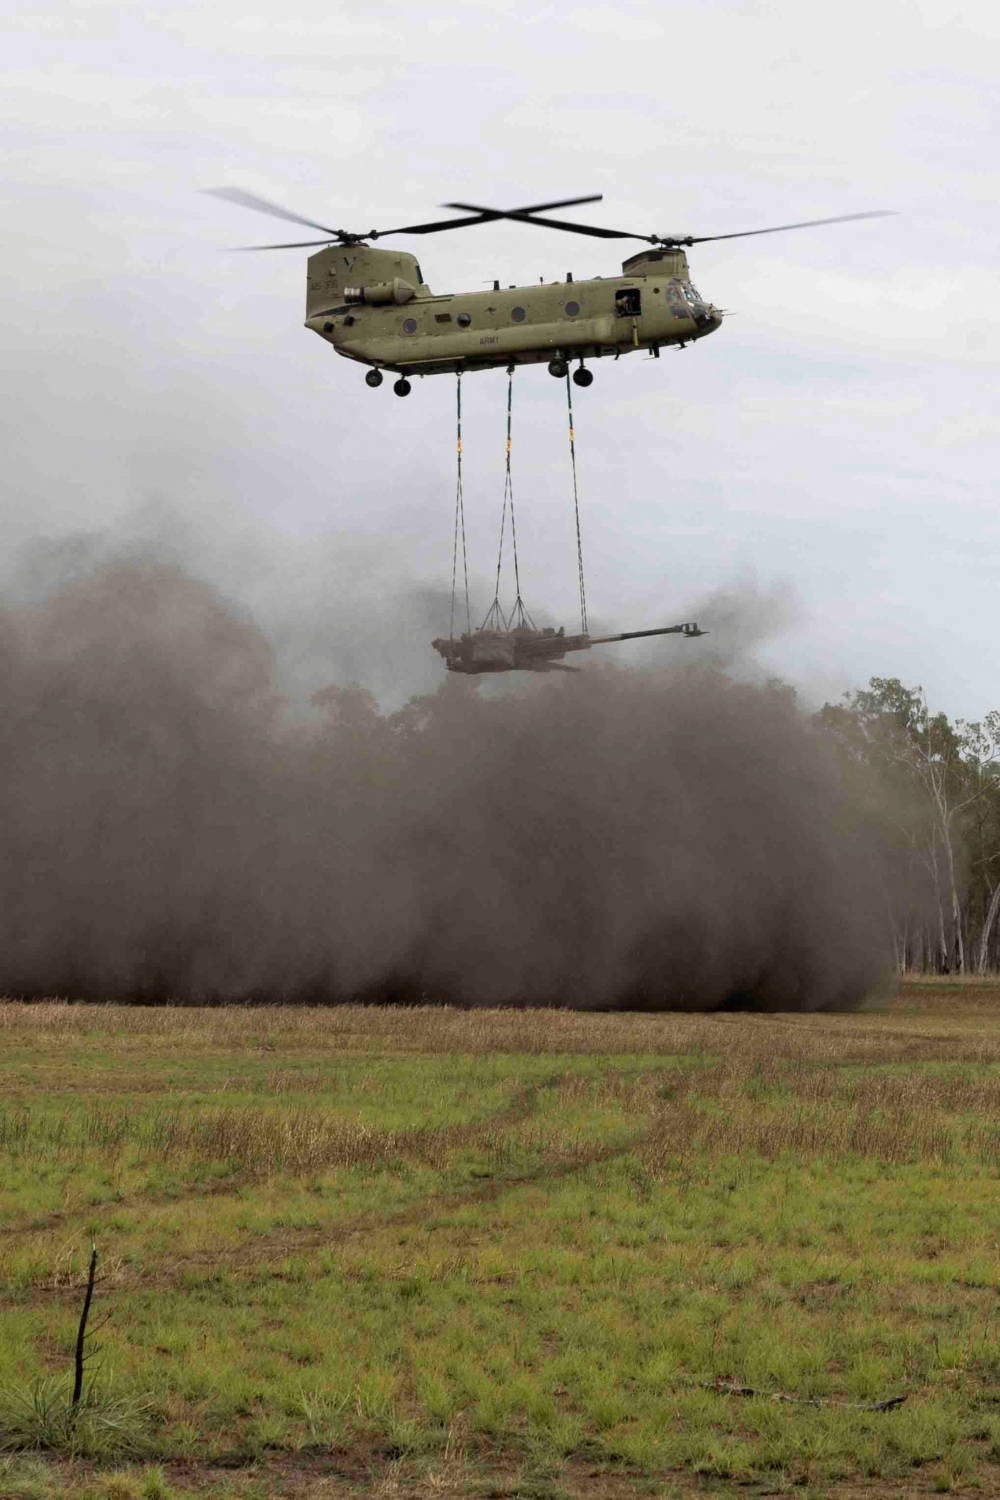 Australian Army Service Members Utilize A Ch 47 Chinook Helicopter To Deploy An Artillery Cannon